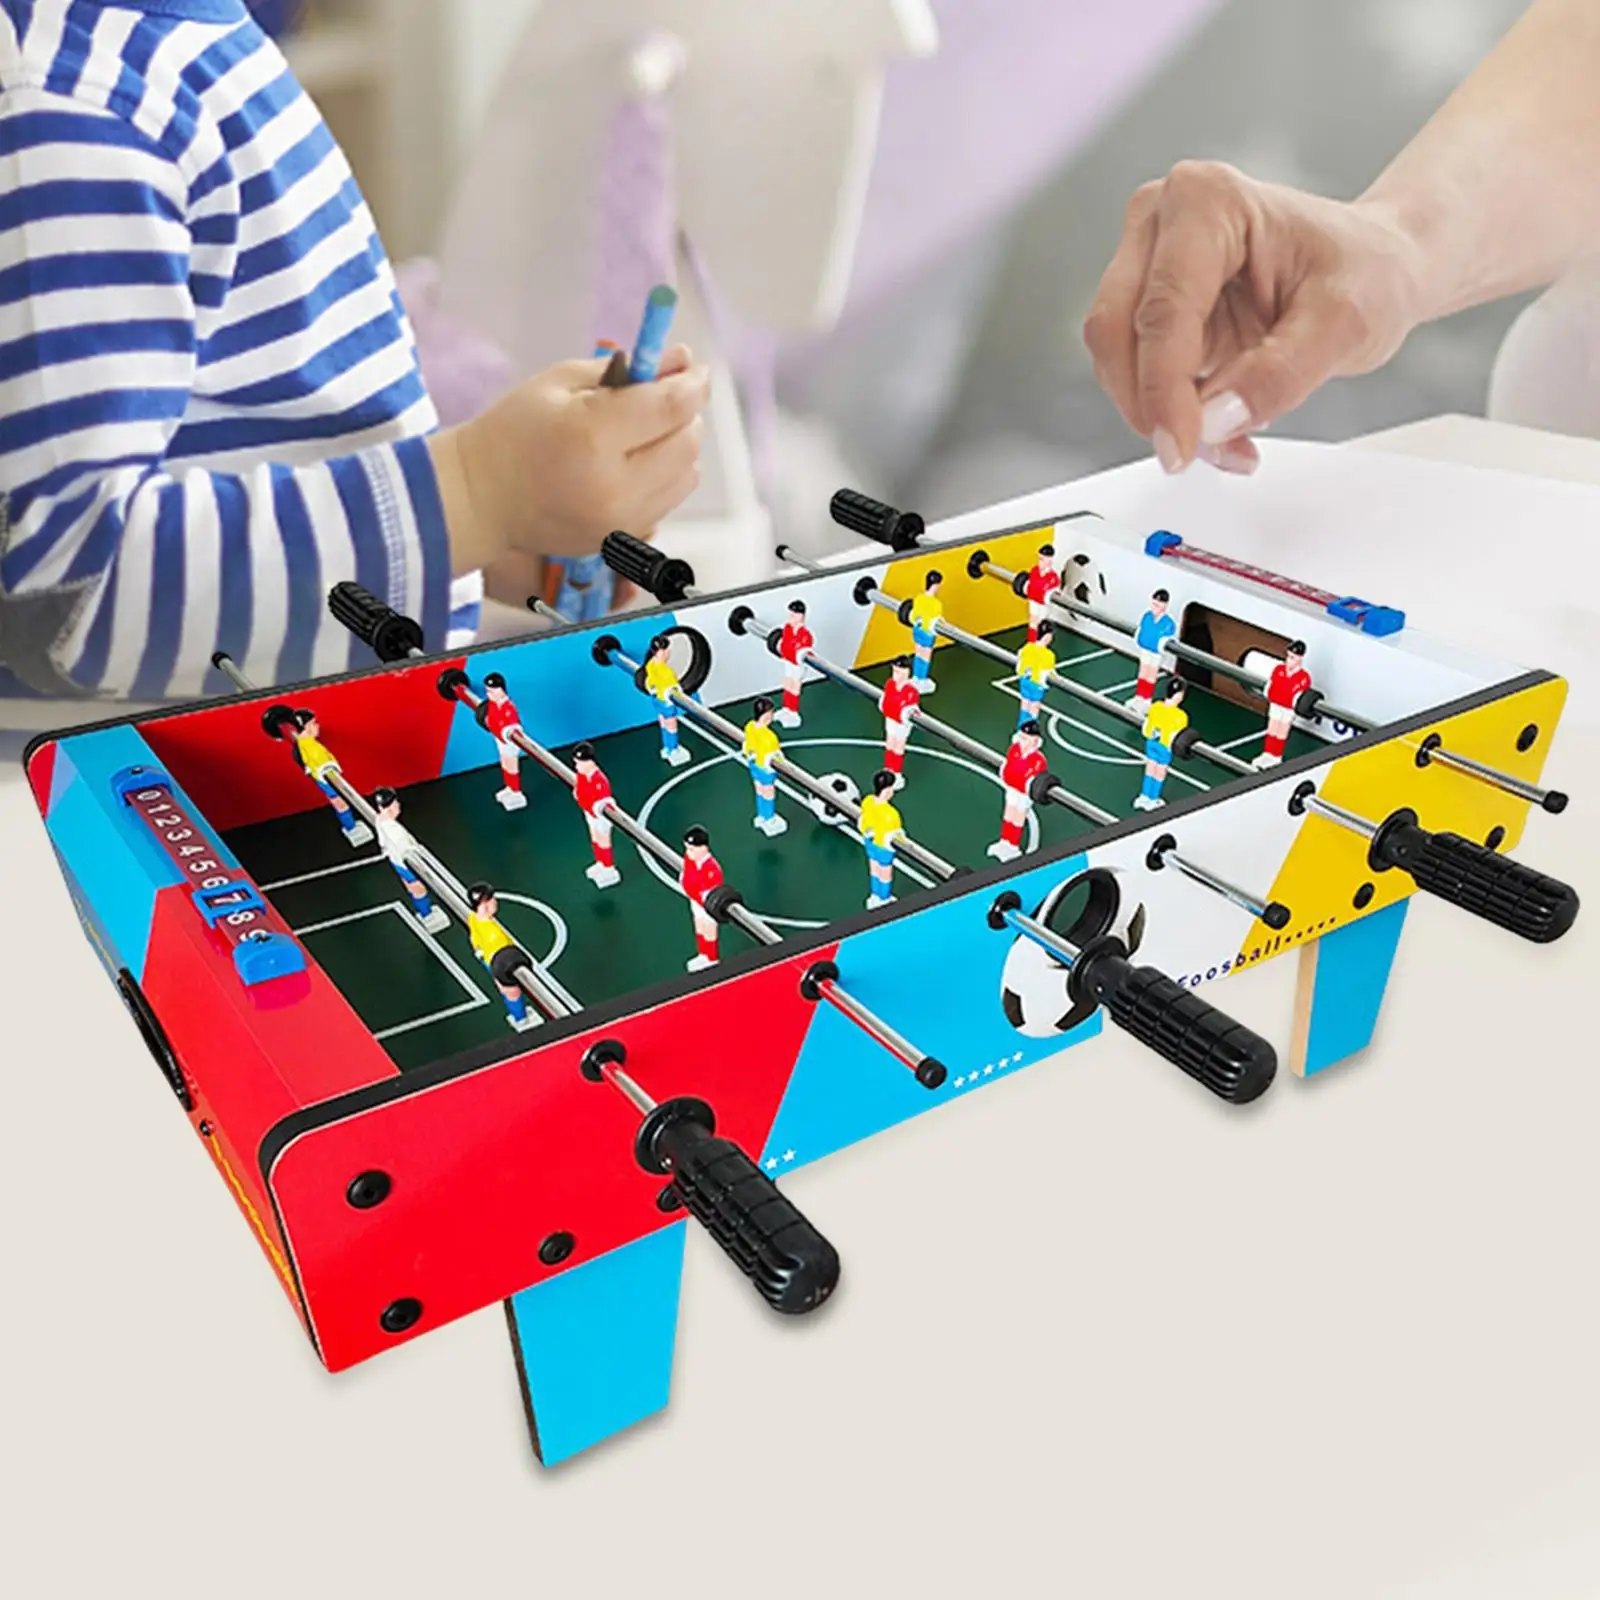 Mini Foosball Table Intellectual Developmental Table Top Soccer Table Football Board Game for Parent Child Interaction Children